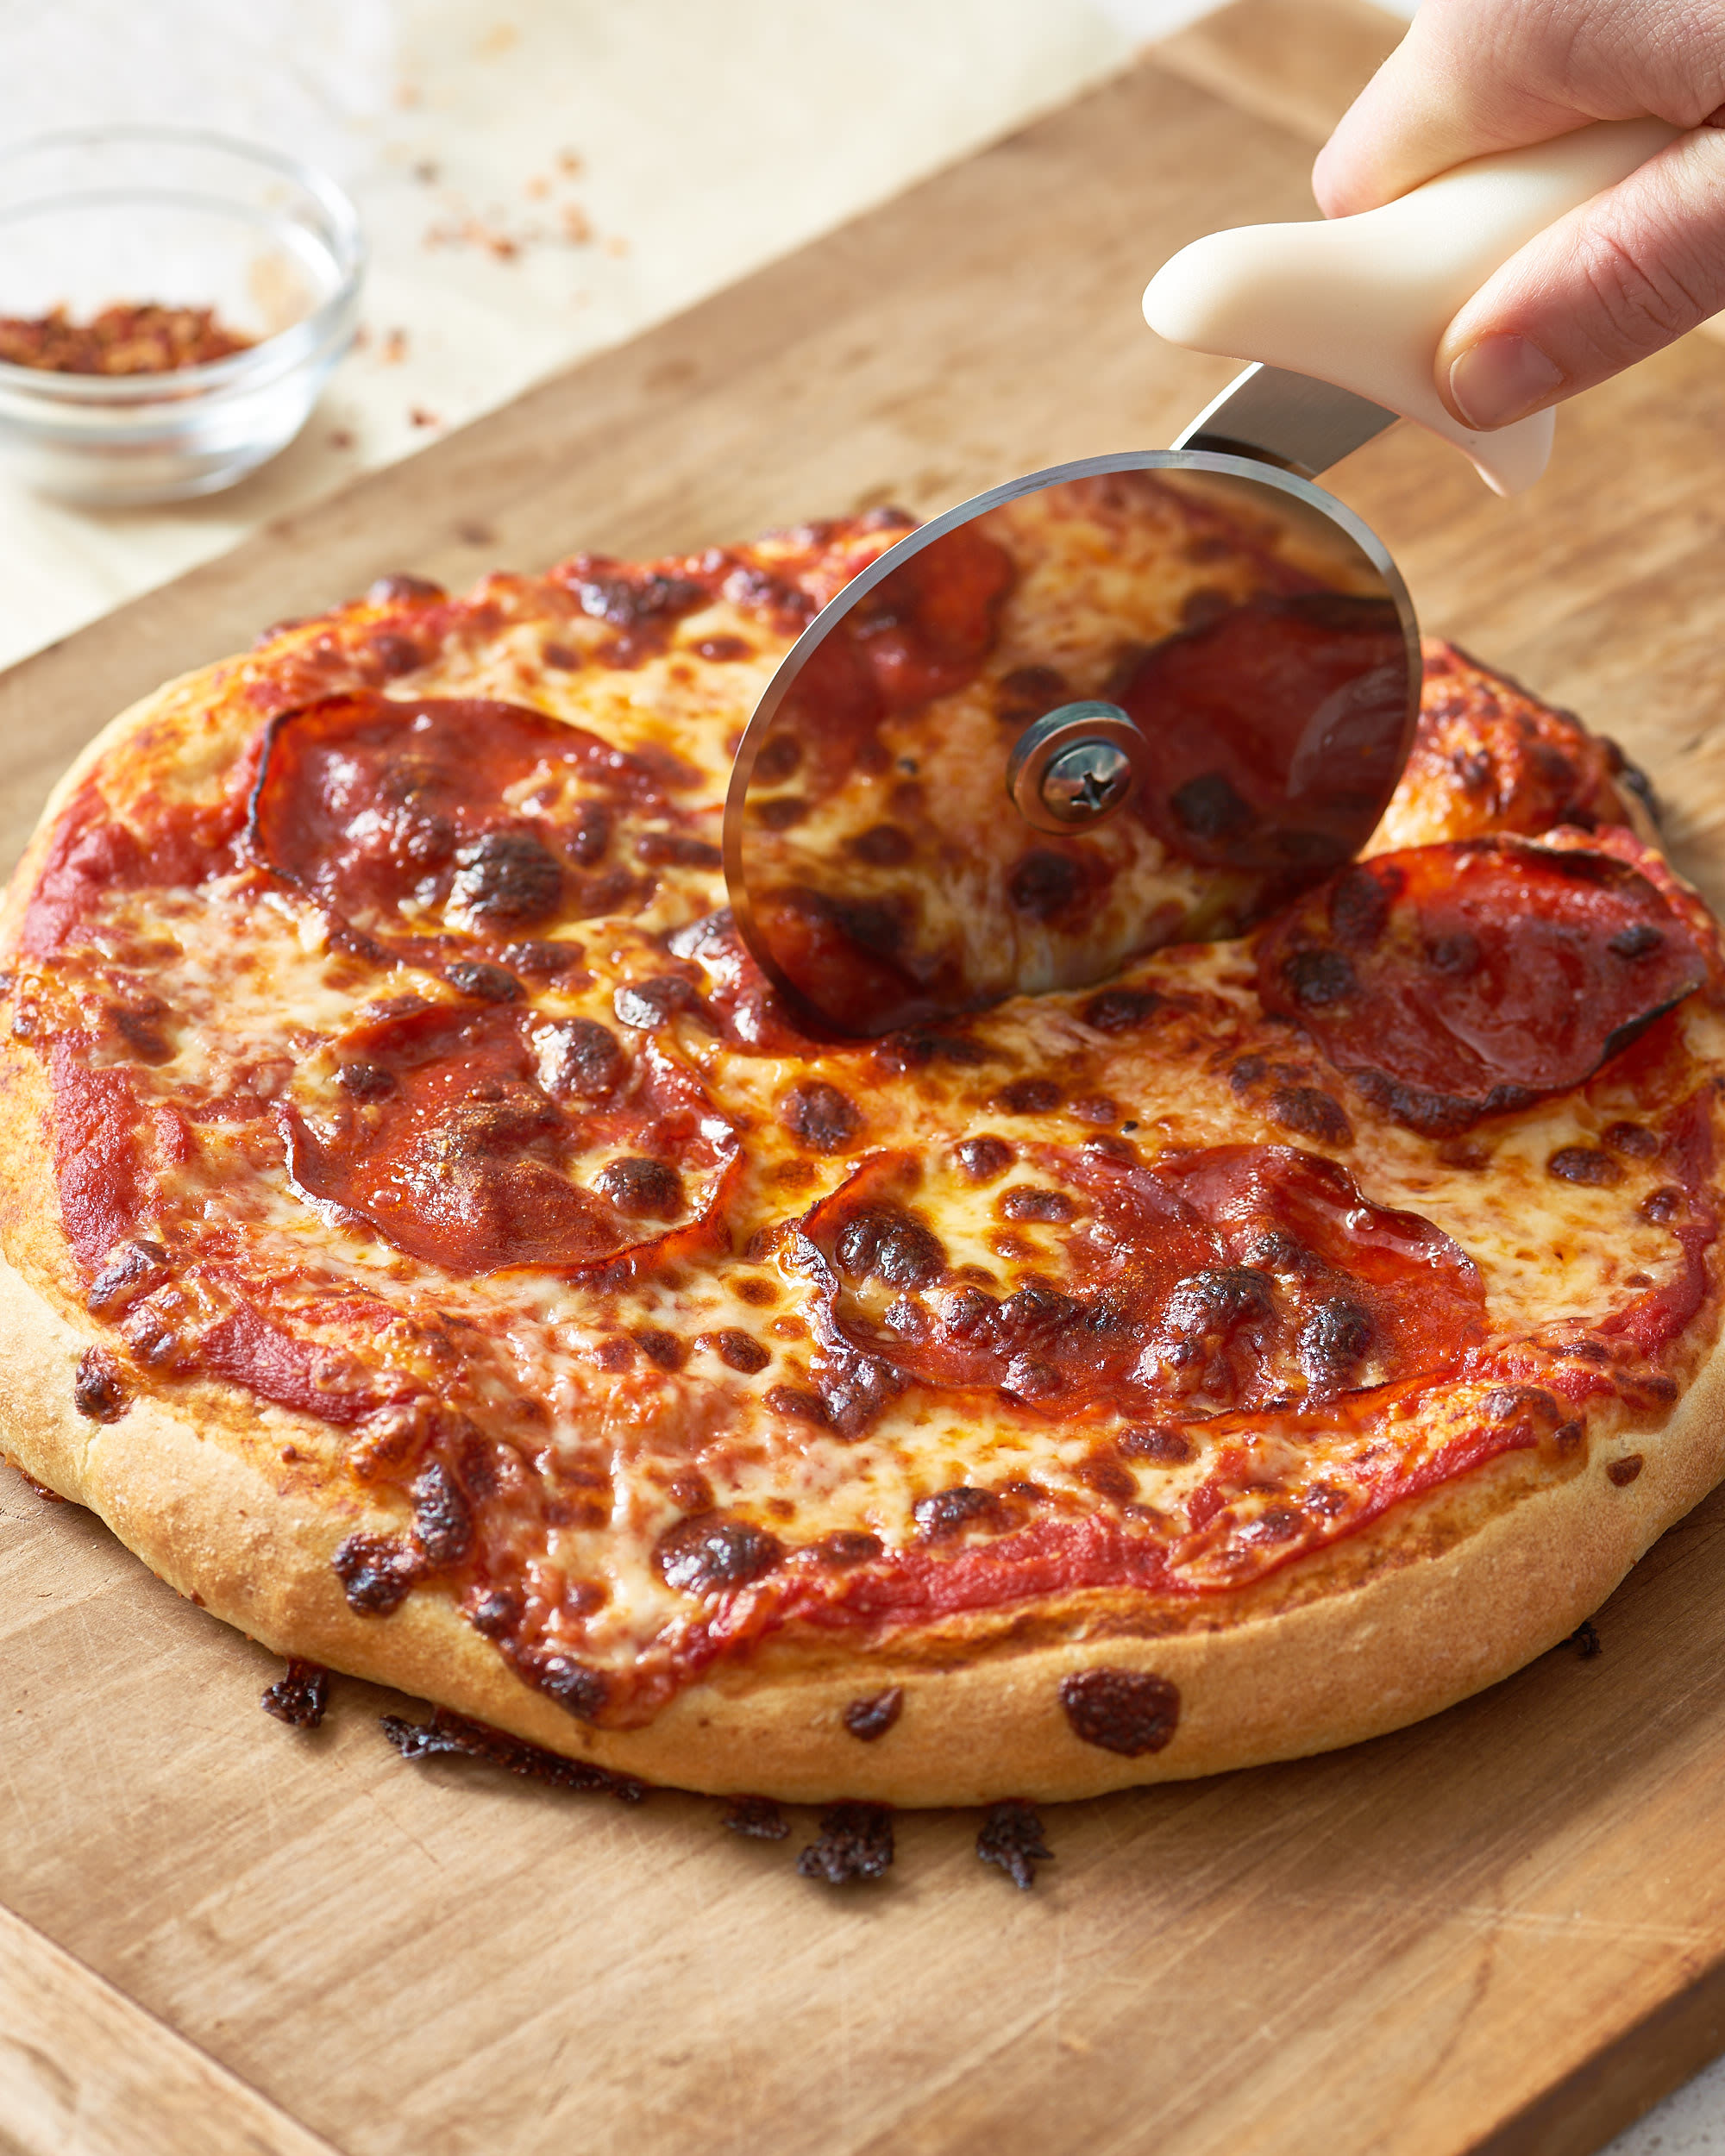 How to make Pizza? - The basics of pizza making process